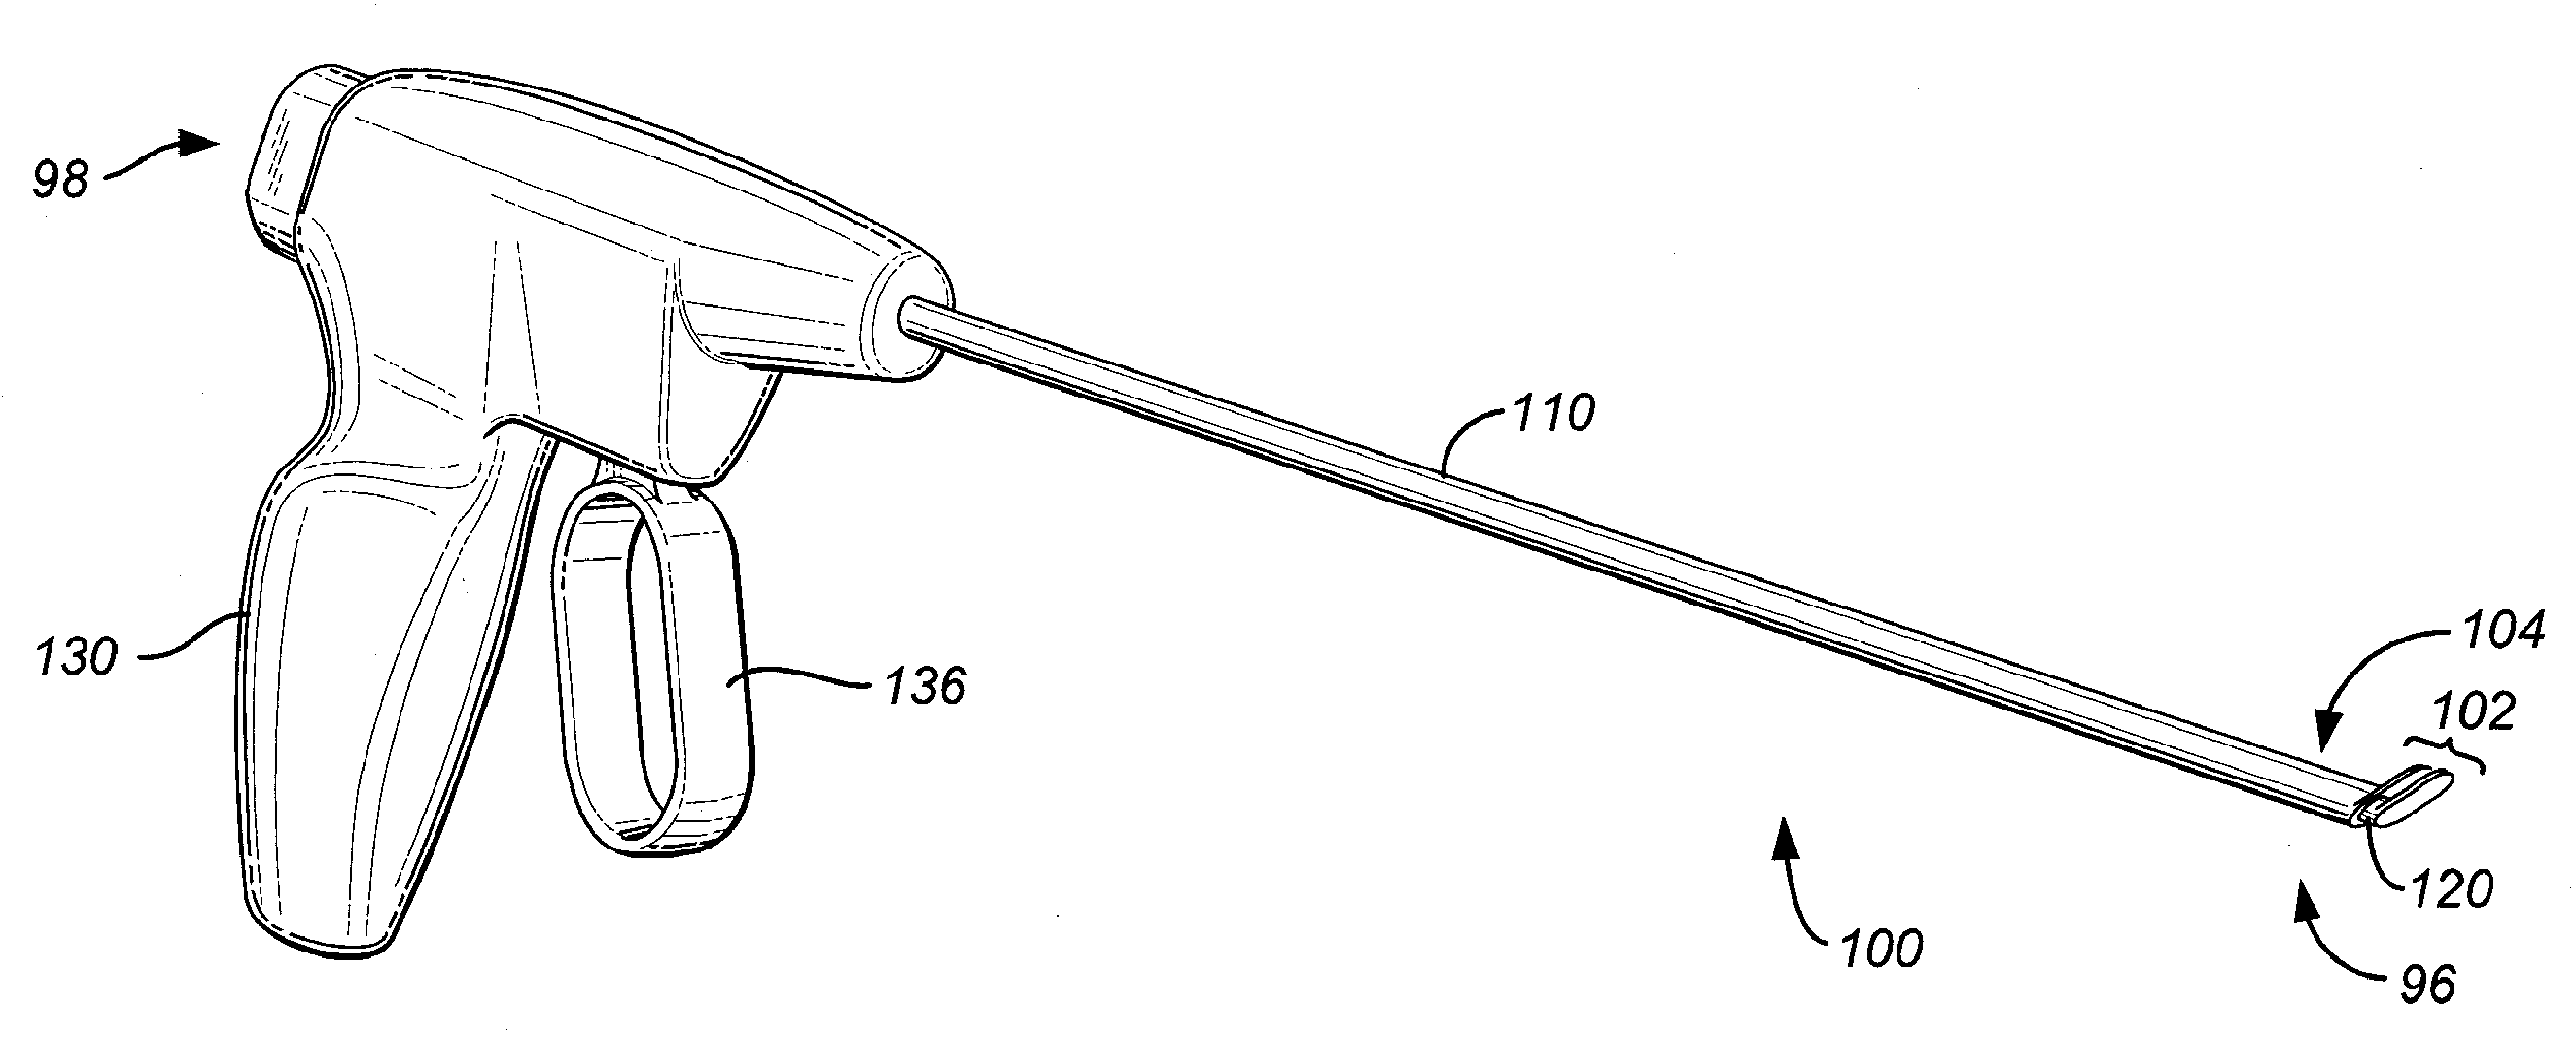 Percutaneous Devices for Separating Tissue, Kits and Methods of Using the Same